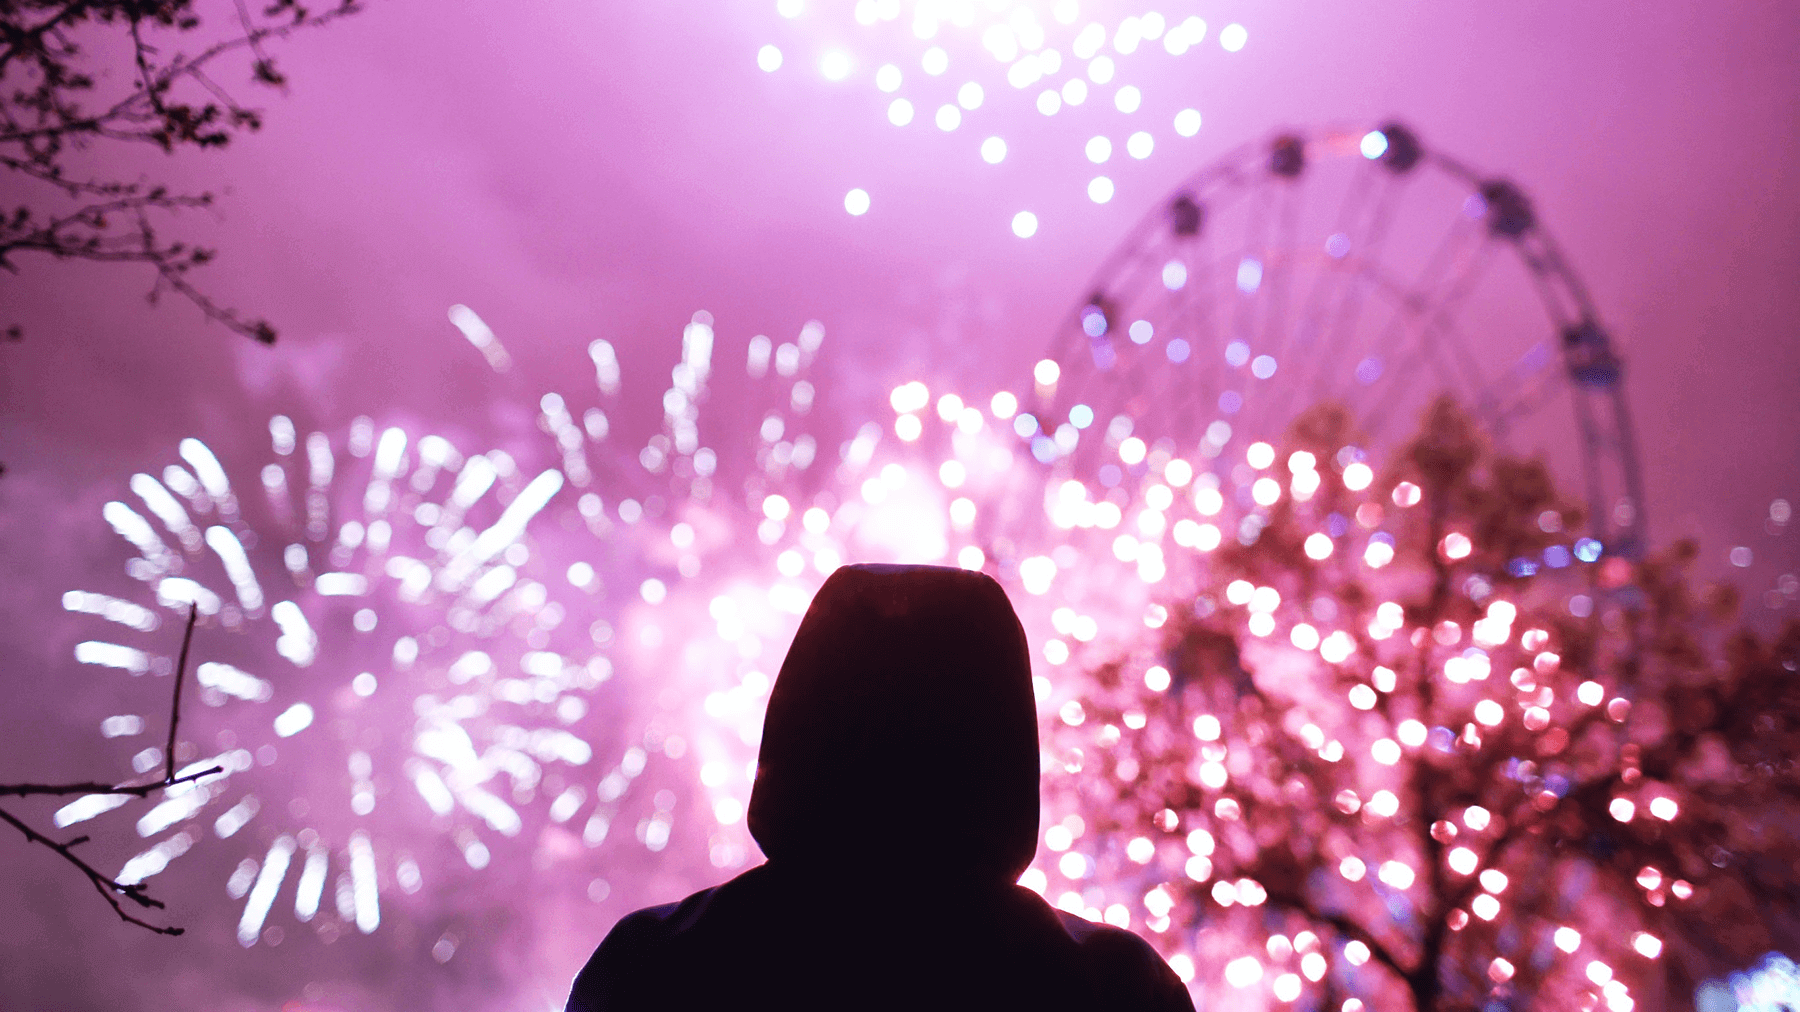 Man standing alone silhouetted against nighttime sky with fireworks.